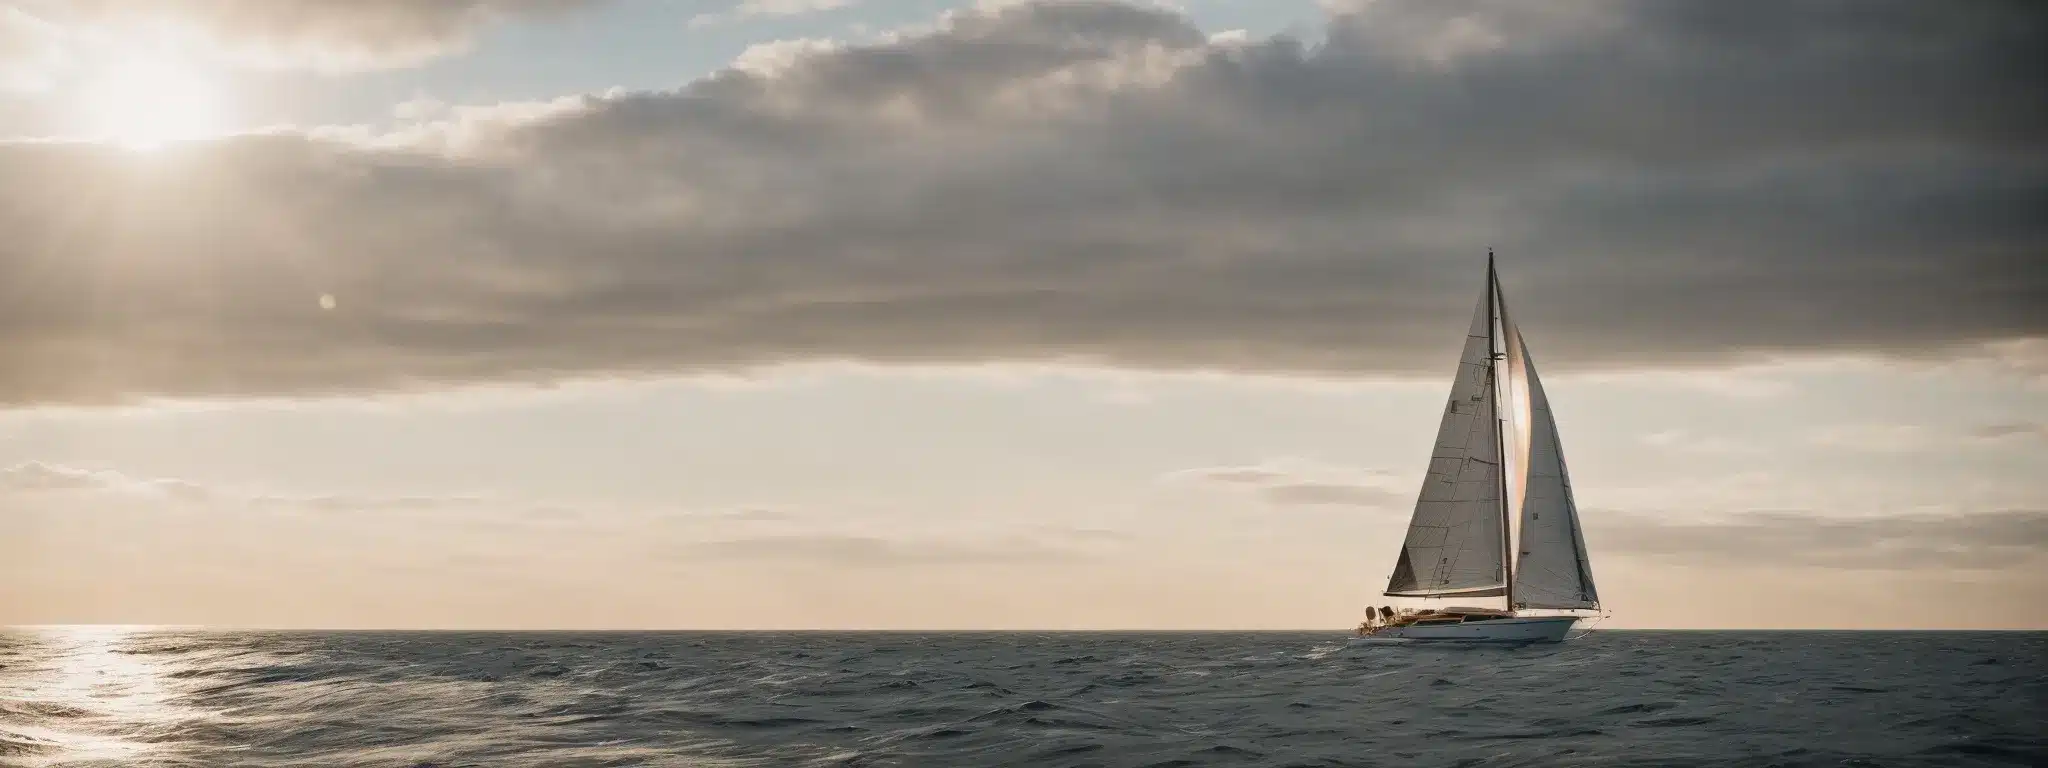 A Sailboat Embarks On A Journey Towards A Distant, Sunlit Horizon Over The Open Sea.